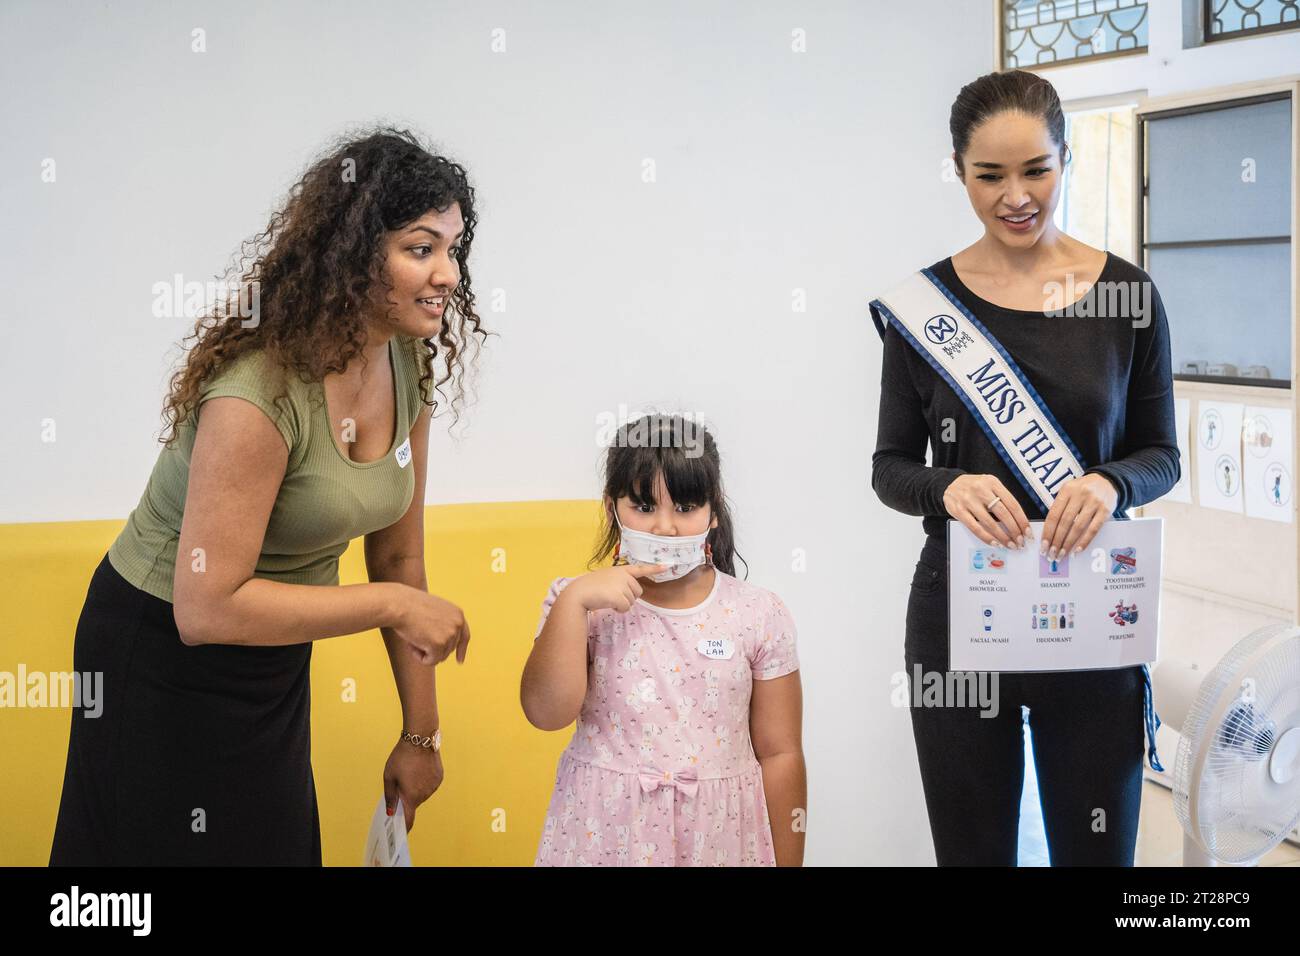 Bangkok, Thailand. 14th Oct, 2023. Tharina Botes, Miss Thailand World 2023 is seen during an English teaching class with young children from Klong Toei Bangkok's biggest slum, at the Bangkok Community Help Foundation Learning and Development Center, at Klong Toei, in Bangkok. Miss Thailand World 2023, Tharina Botes, mixed Thai-South African heritage joined as a volunteer in a free weekly English program for kids and adults, organized by the Bangkok Community Help Foundation, at Klong Toei, Bangkok's biggest slum. (Photo by Nathalie Jamois/SOPA Images/Sipa USA) Credit: Sipa USA/Alamy Live News Stock Photo